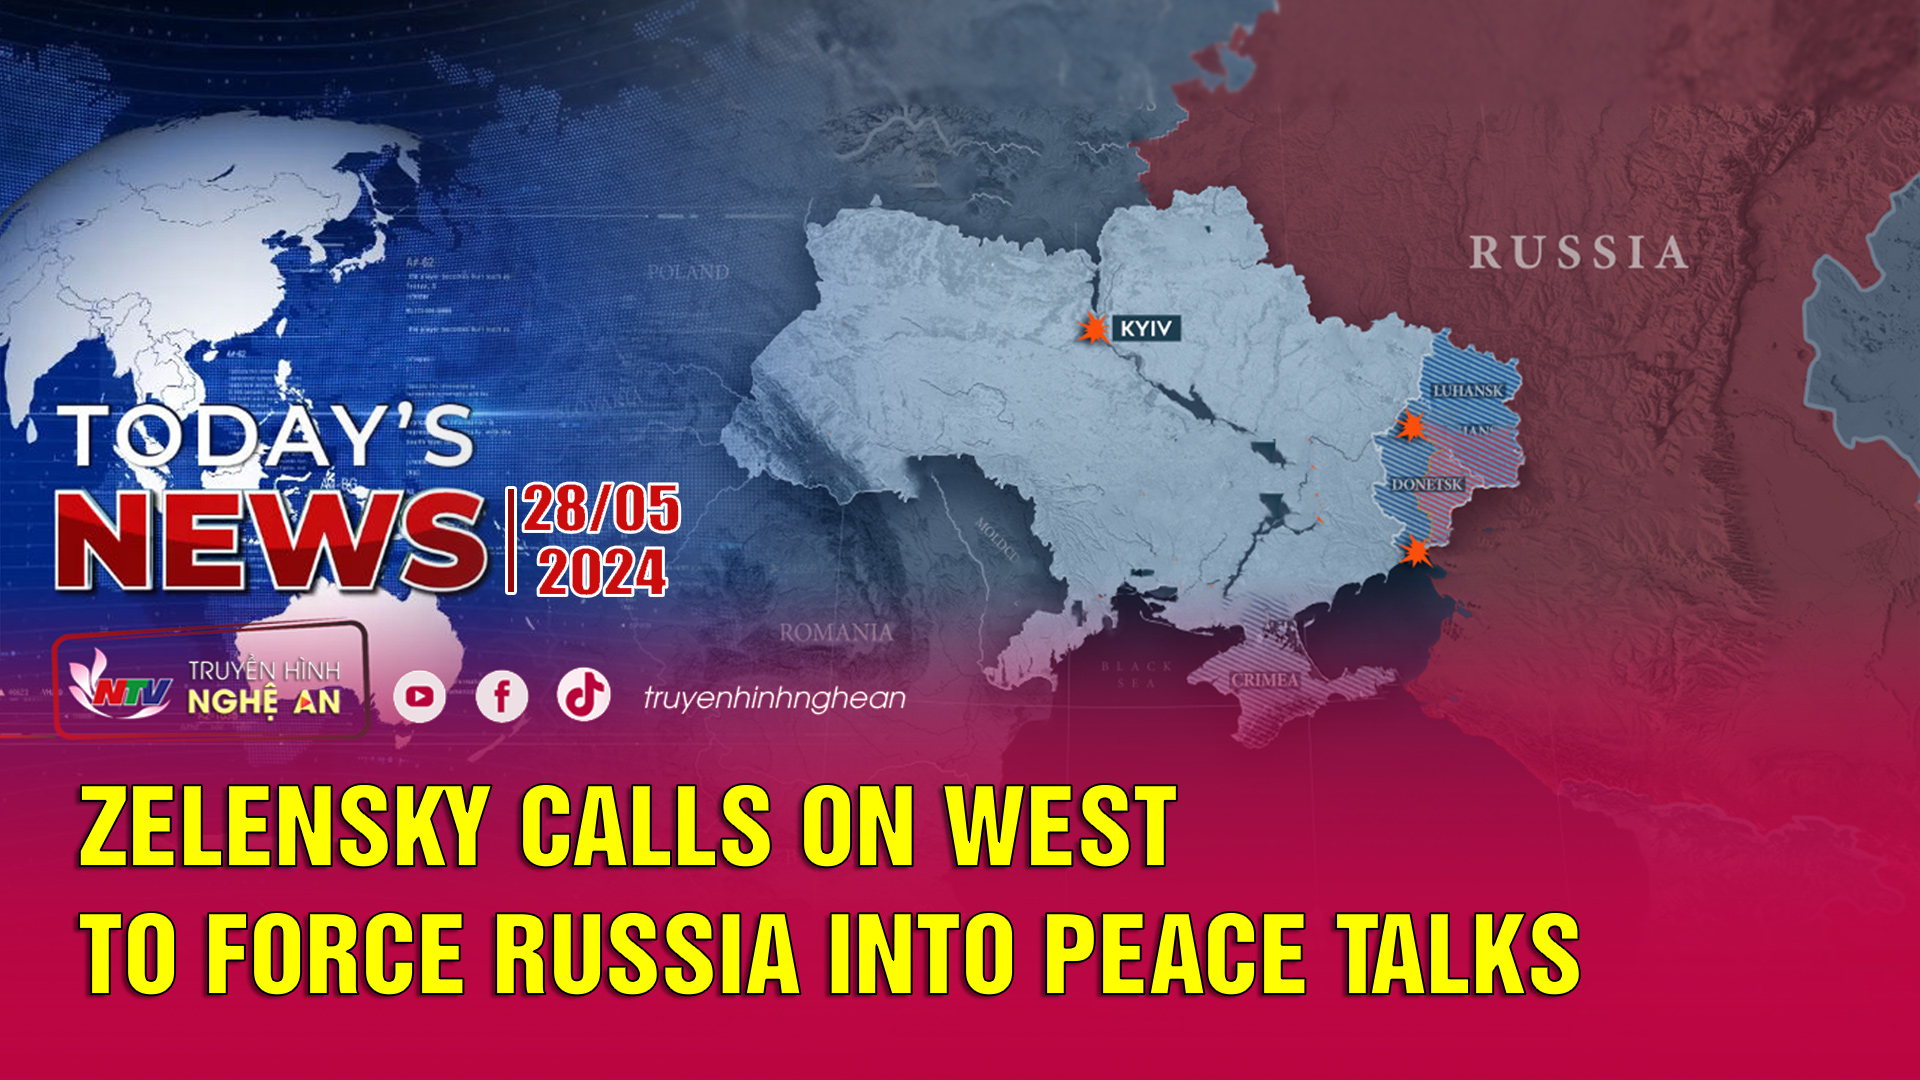 Today's News 25/05/2024: Zelensky calls on West to force Russia into peace talks